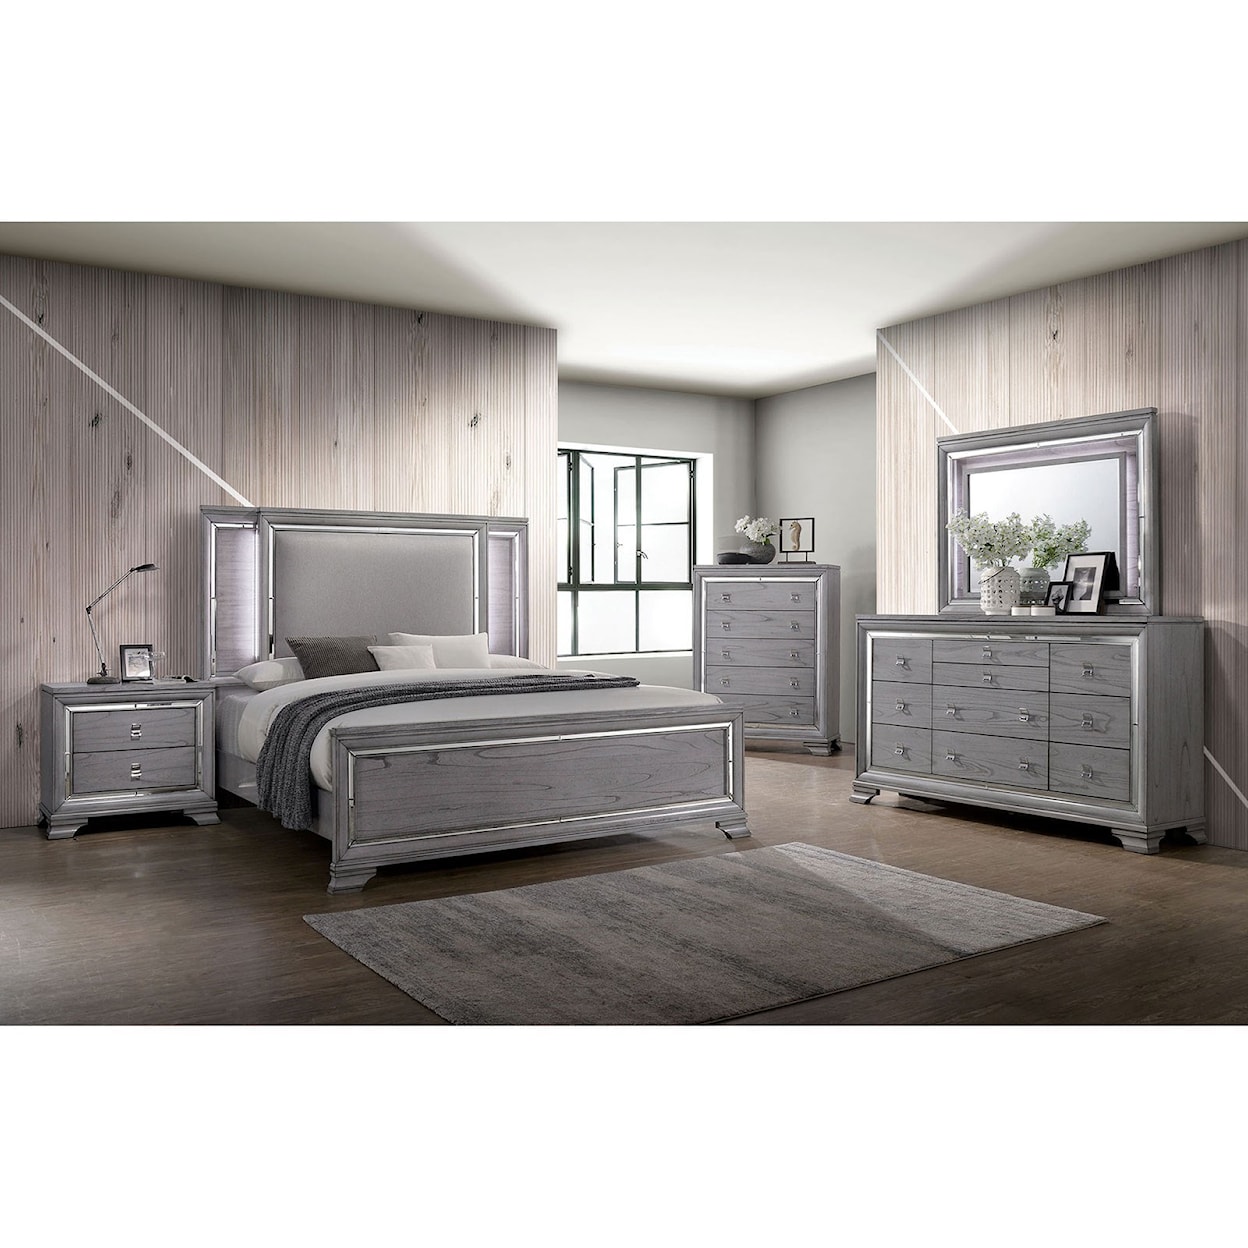 FUSA Alanis Cal King Upholstered Bed